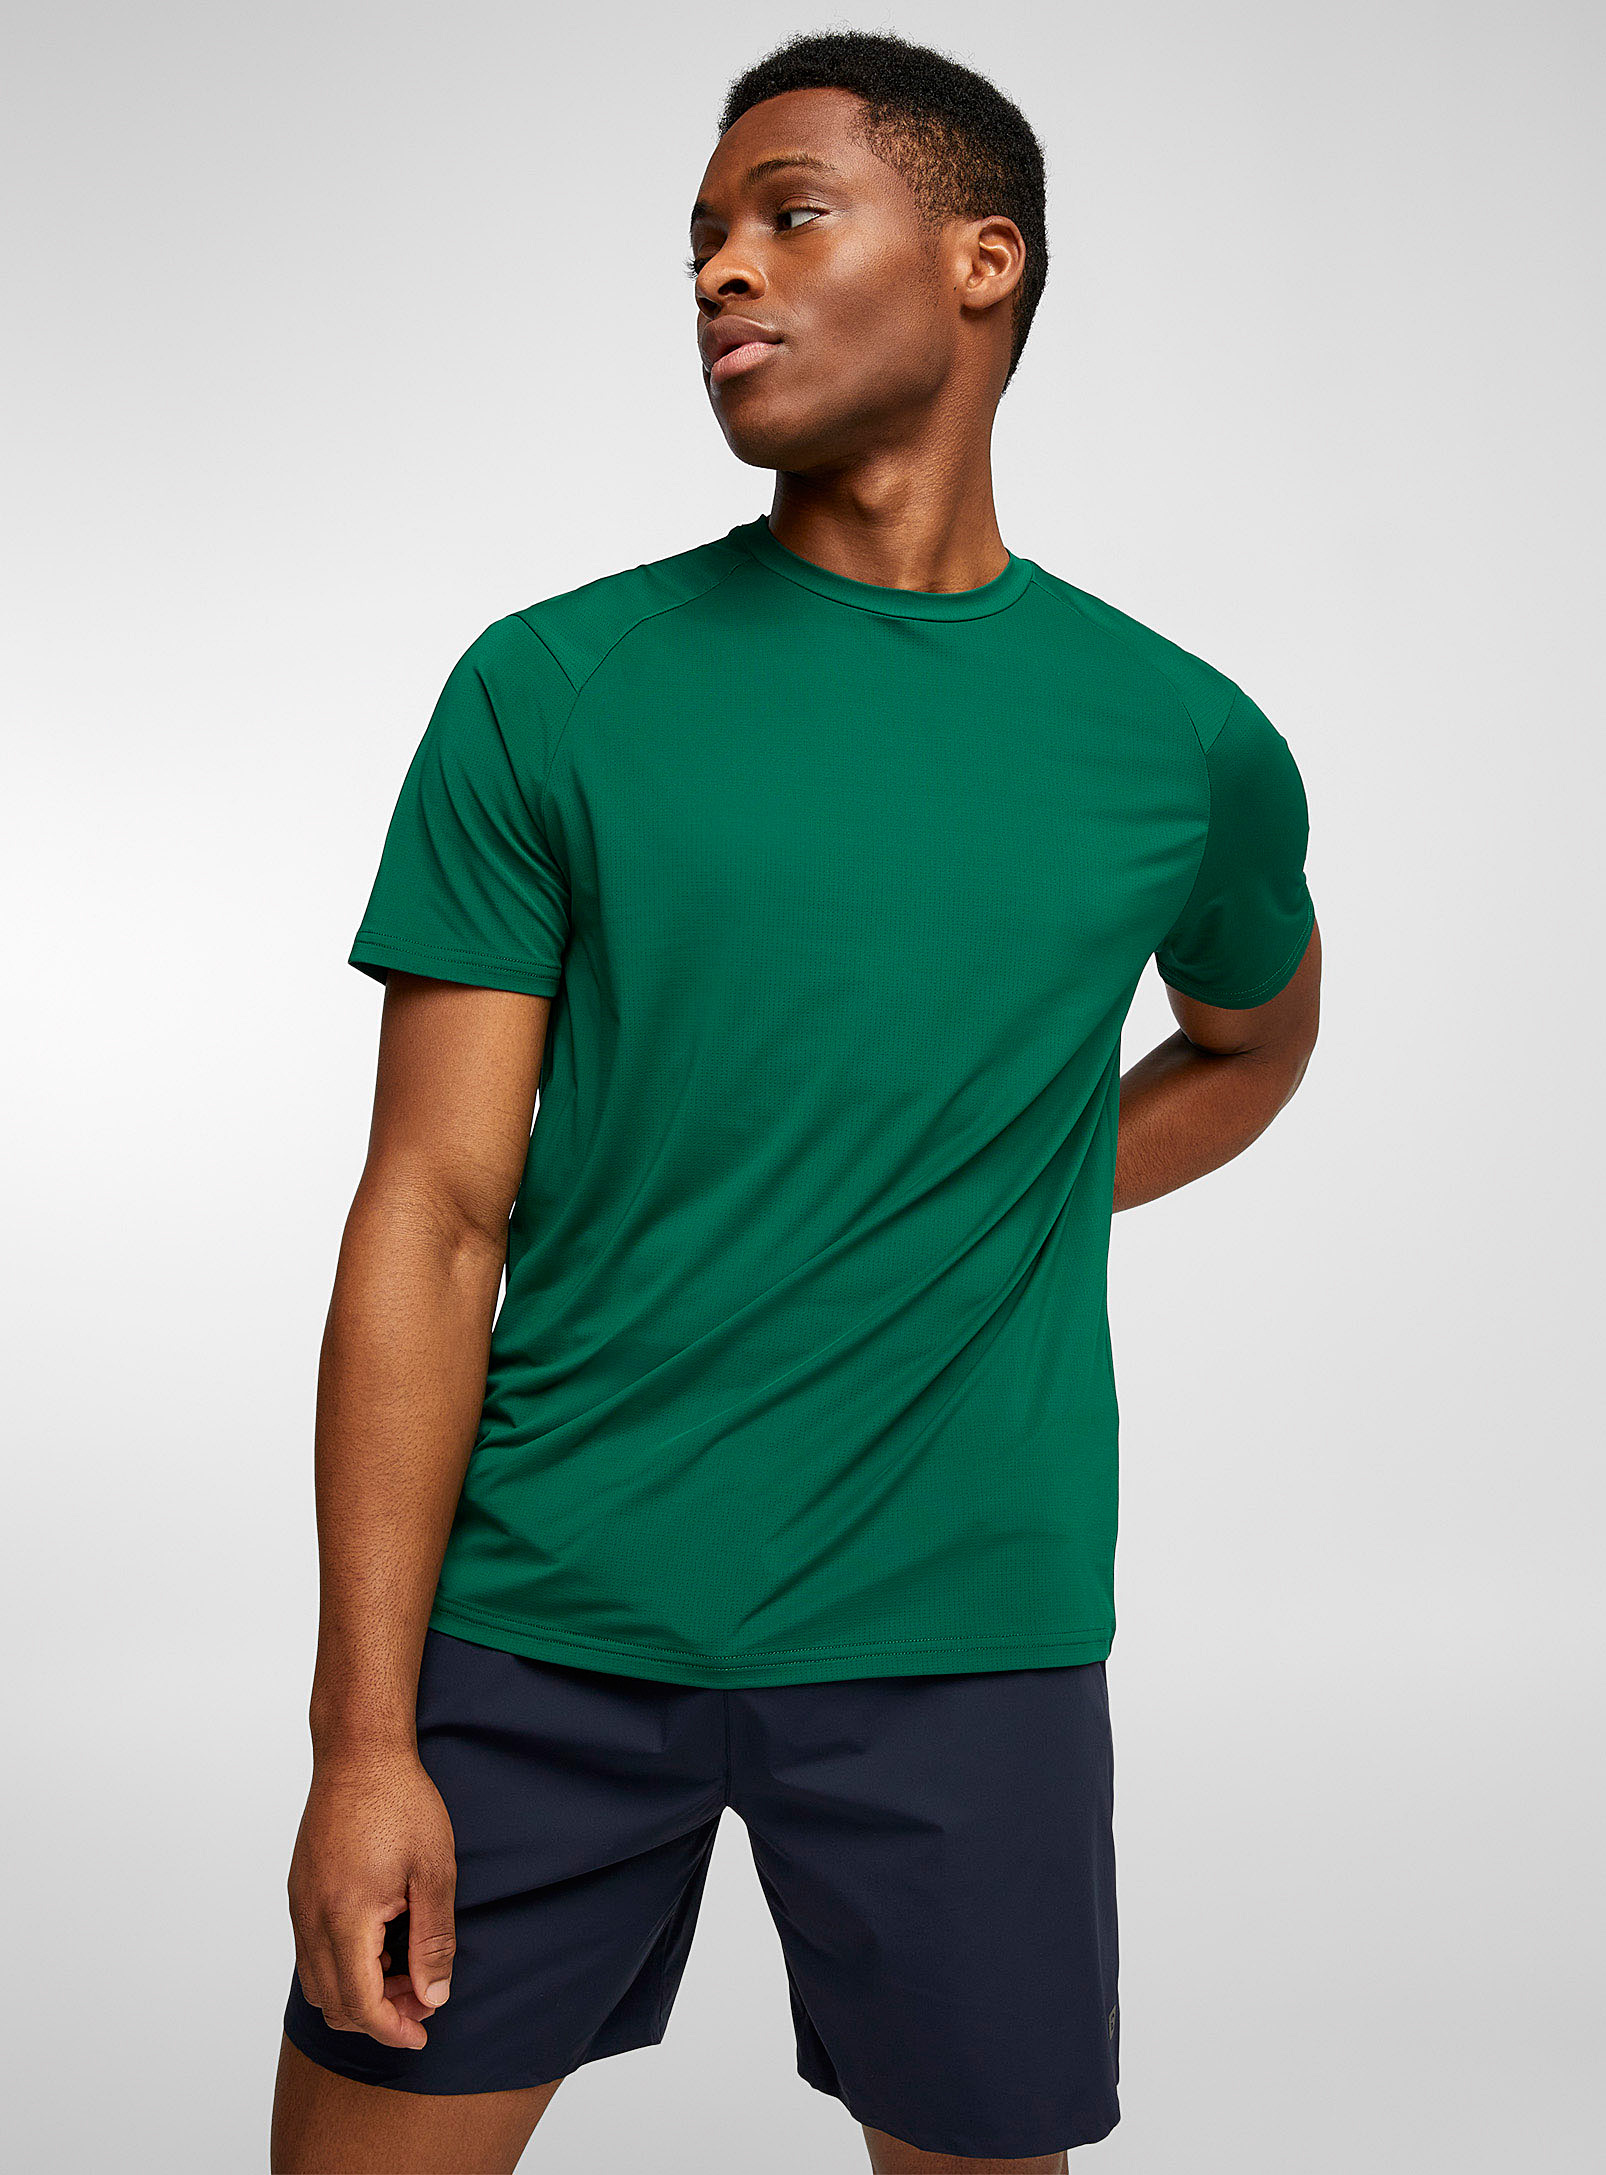 I.fiv5 Micro-perforated High-intensity Tee In Mossy Green